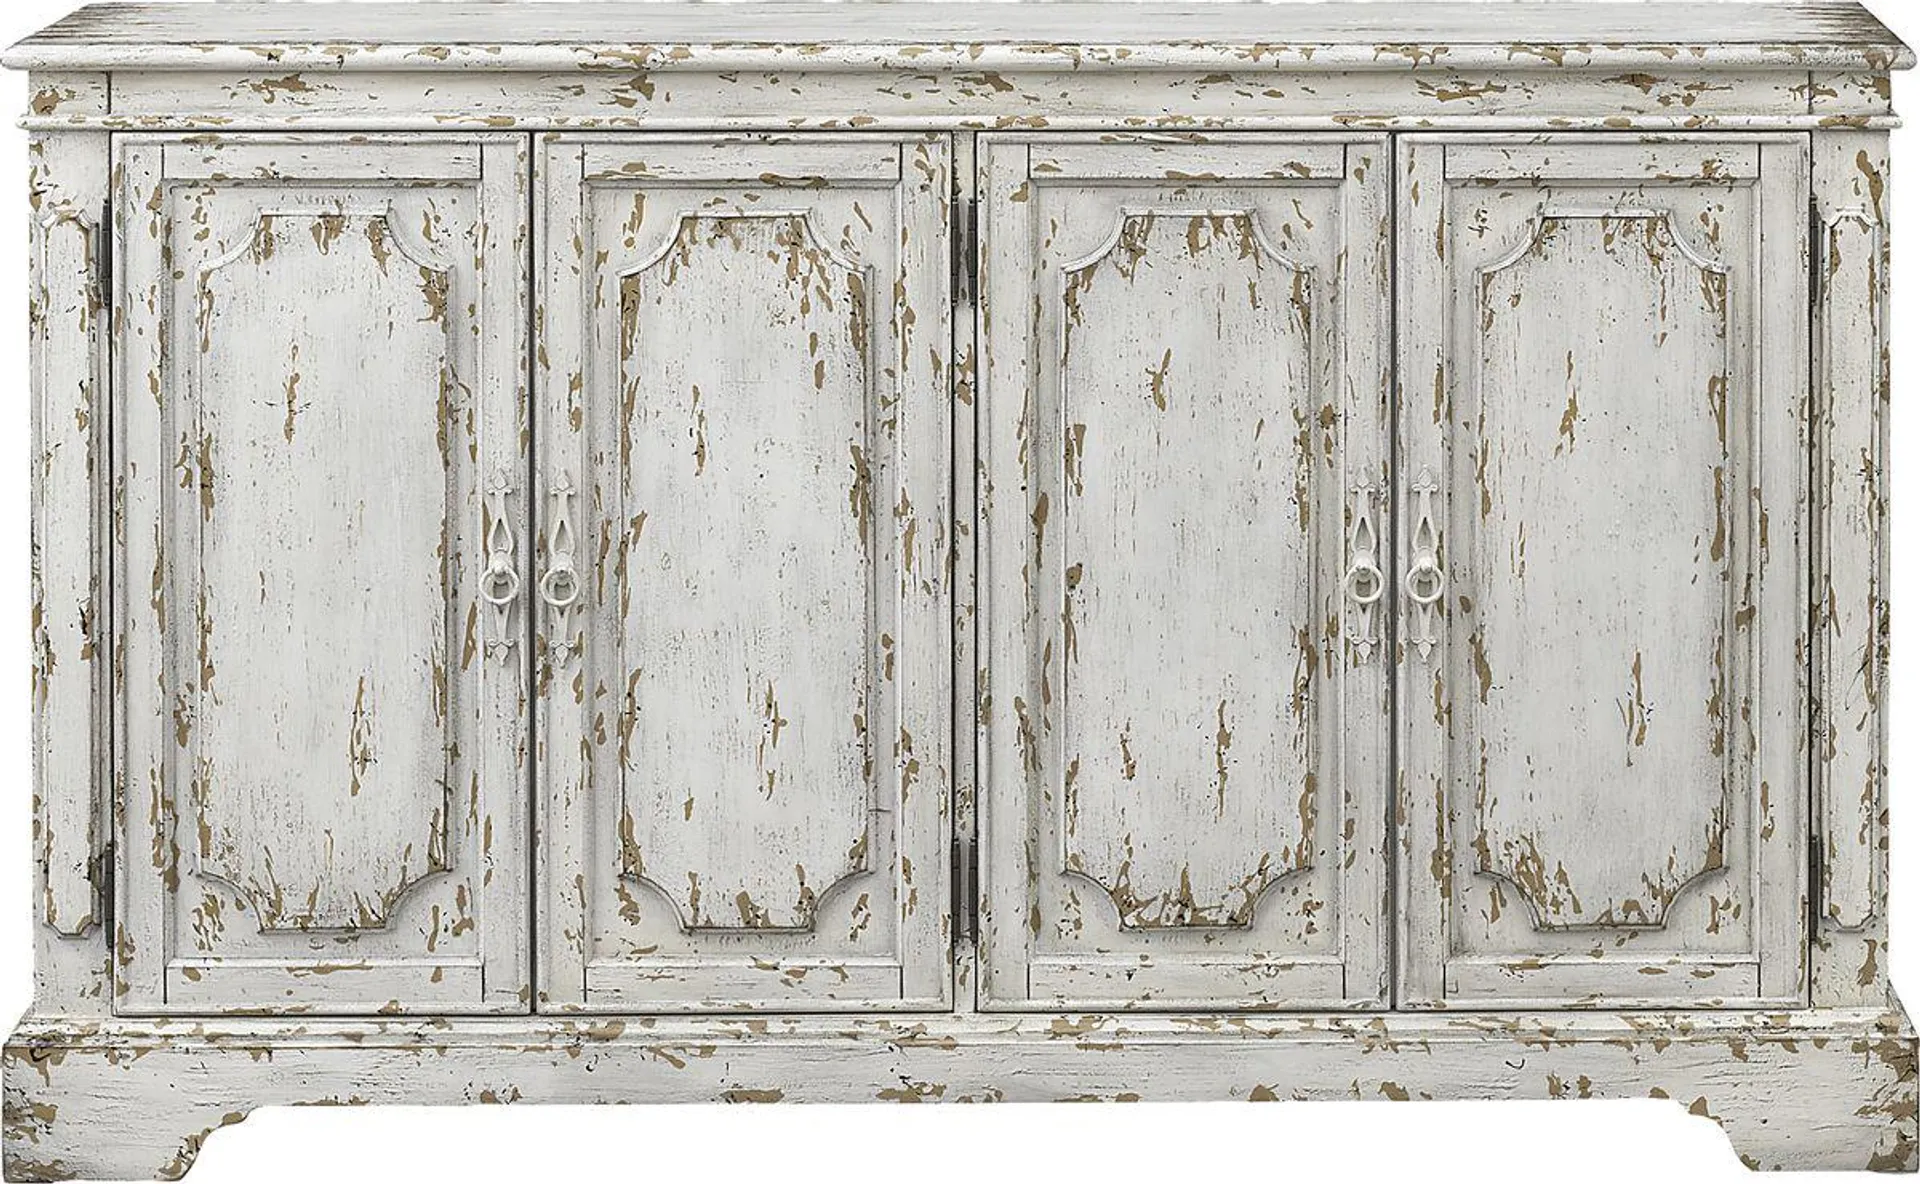 Wester Road Cream Colors,Light Wood,White Credenza